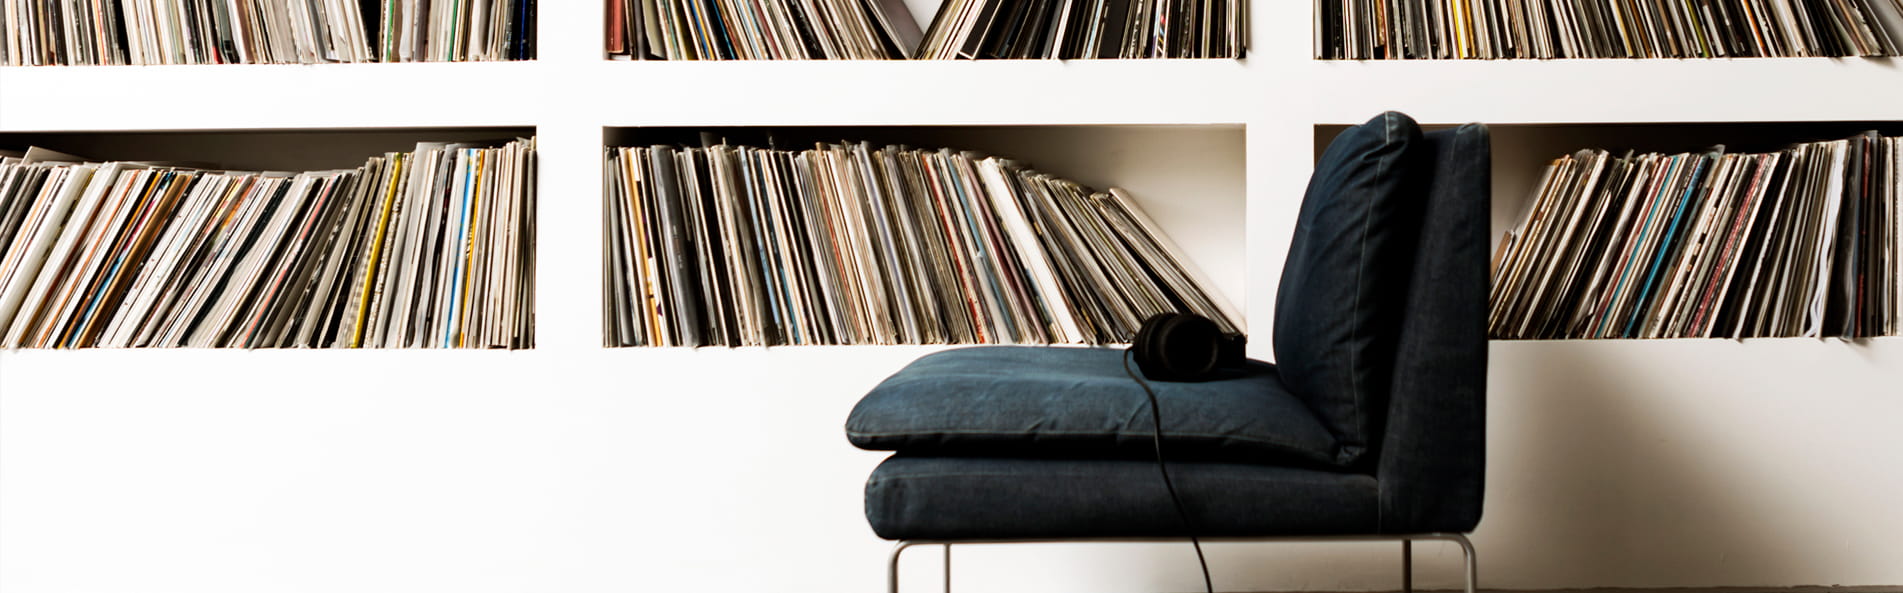 Room with shelves full of records